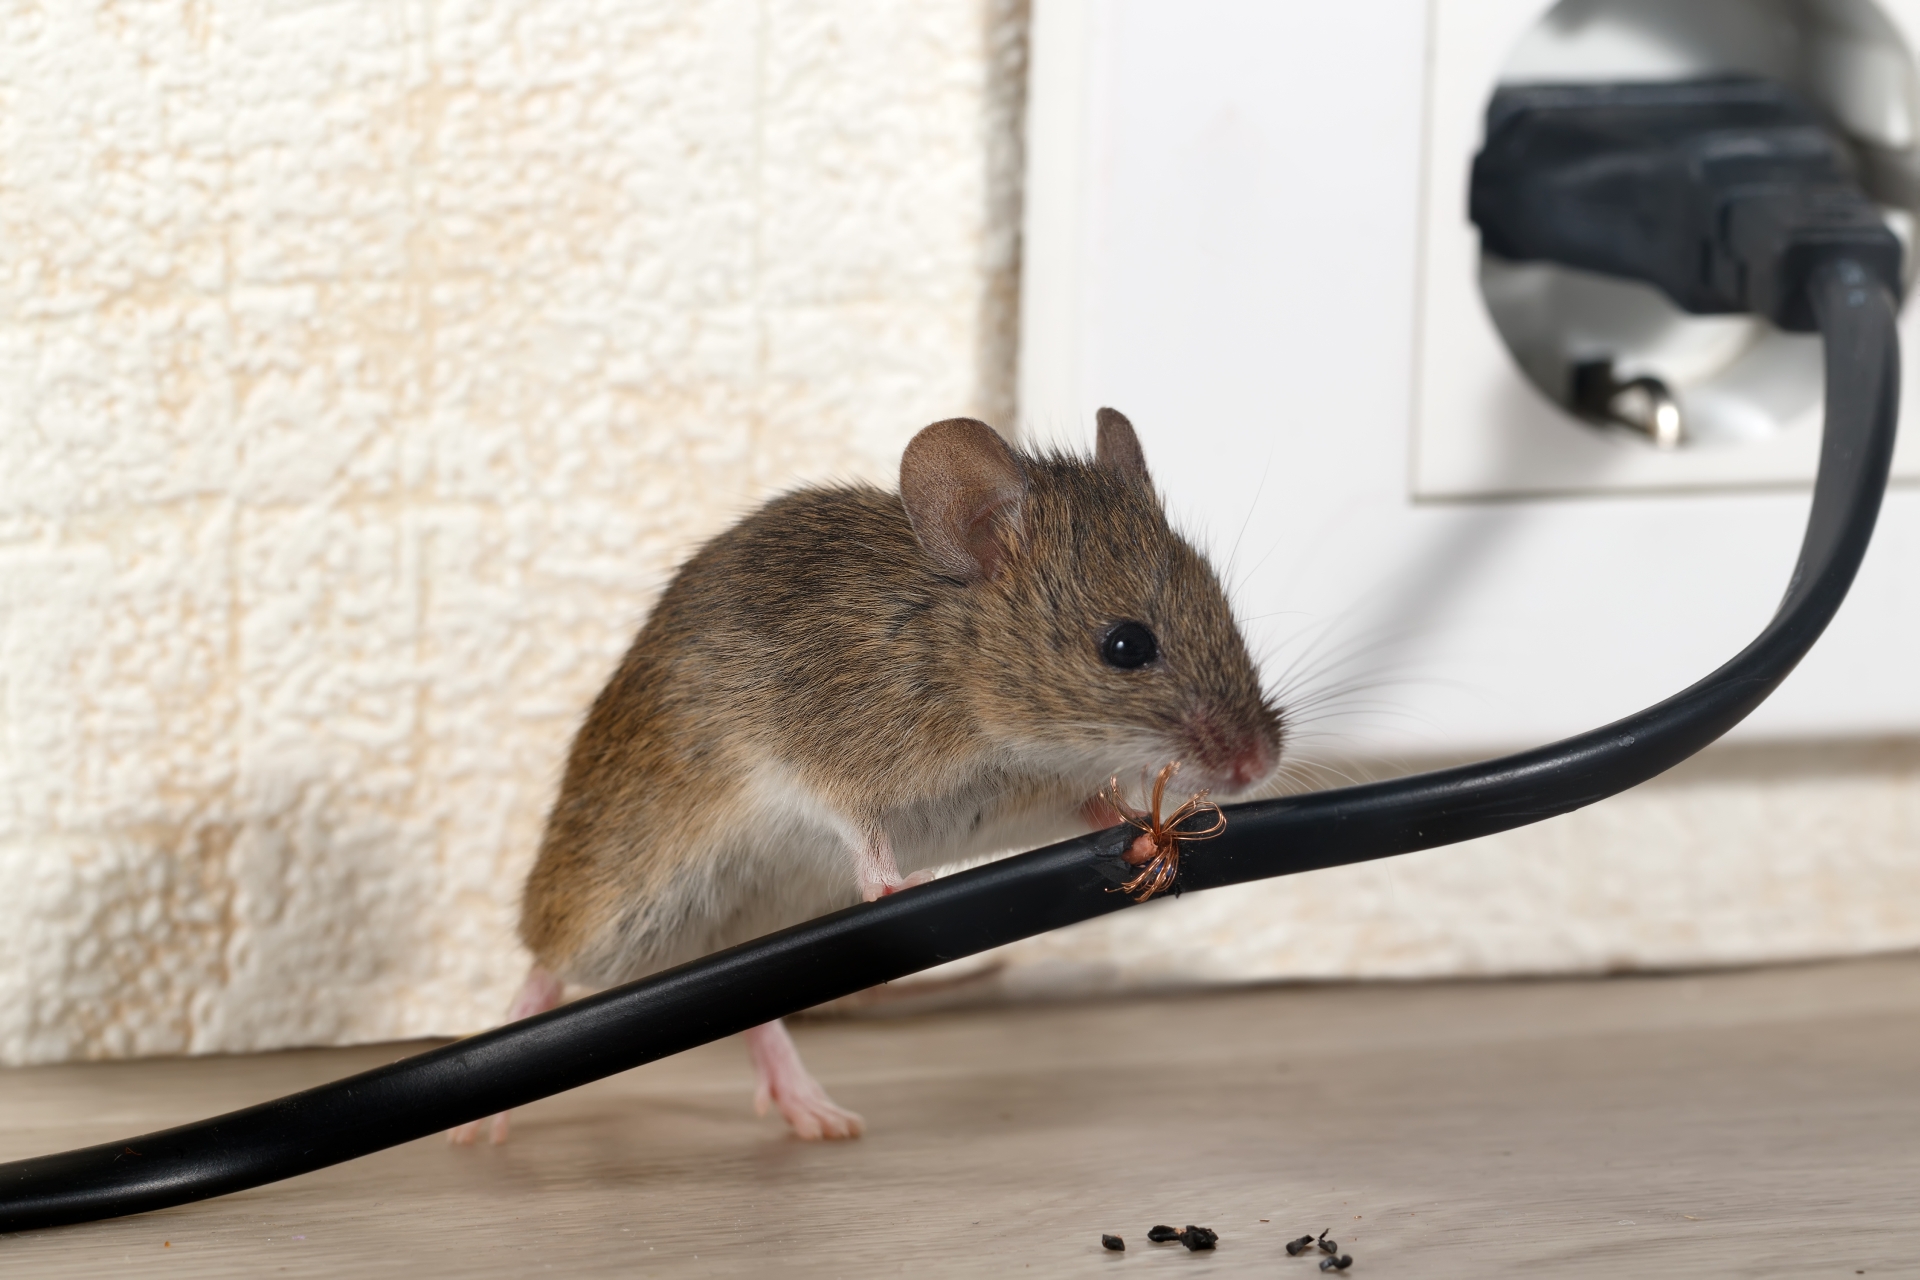 Mice Infestation, Pest Control in West Wickham, BR4. Call Now 020 8166 9746